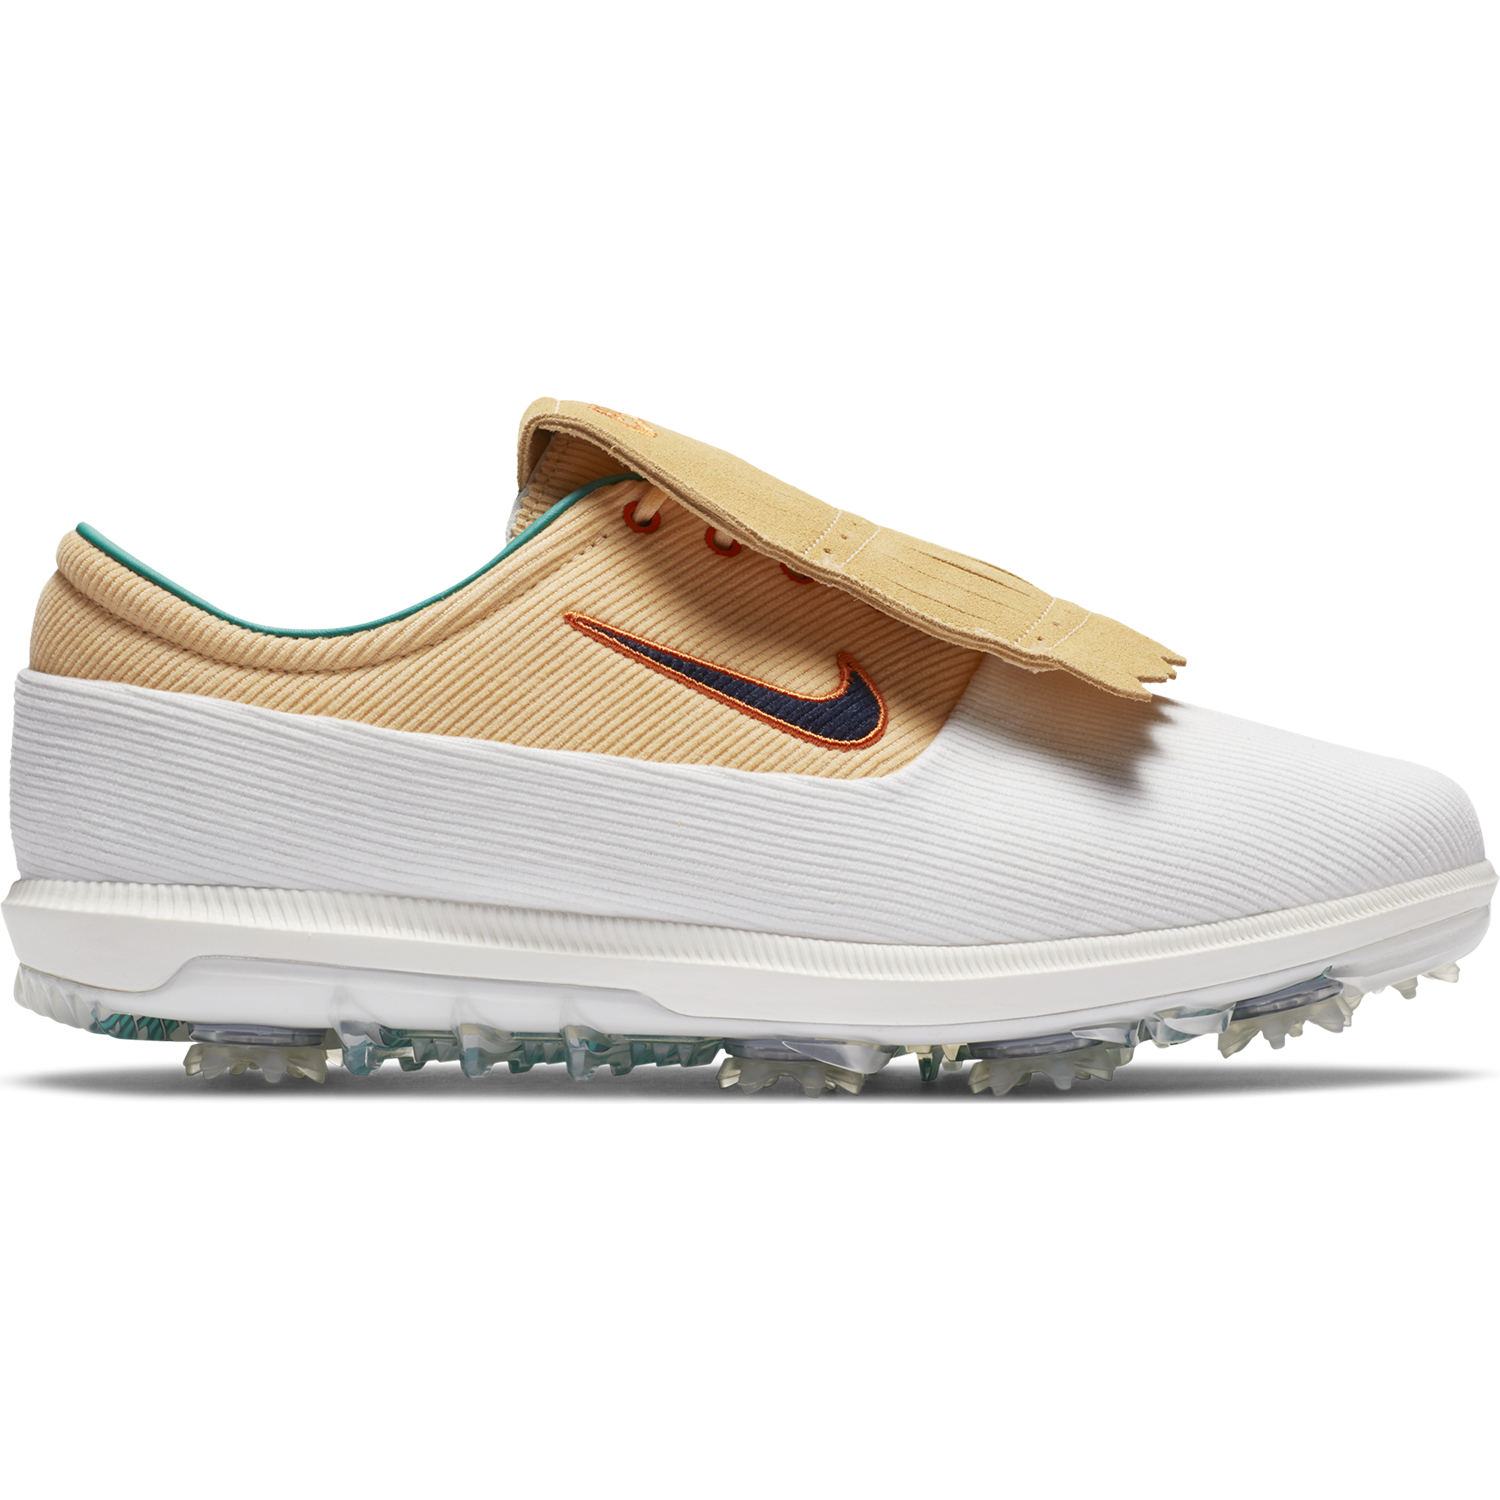 nike men's air zoom victory tour golf shoes